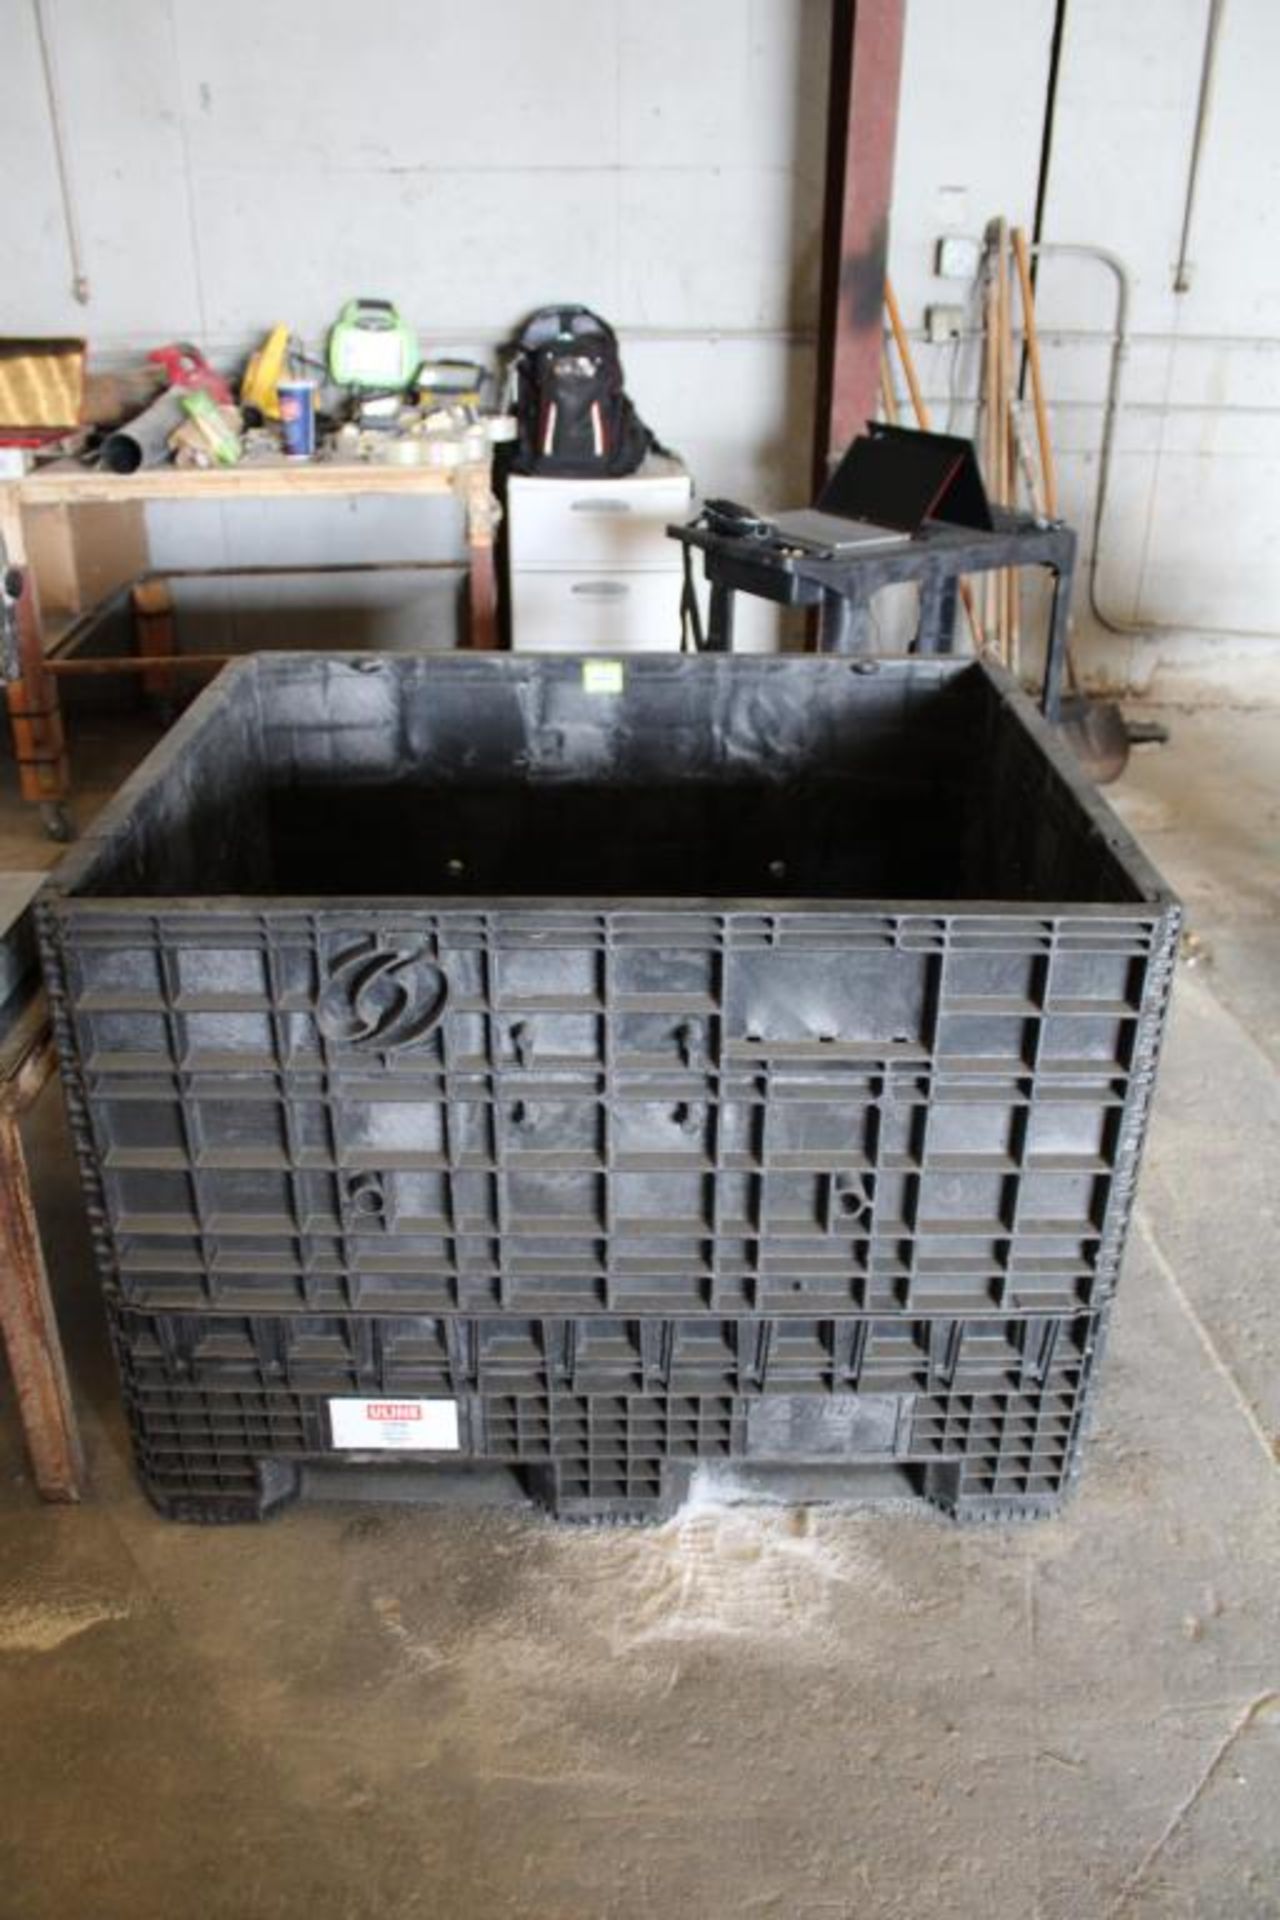 Uline Collapsible Crate